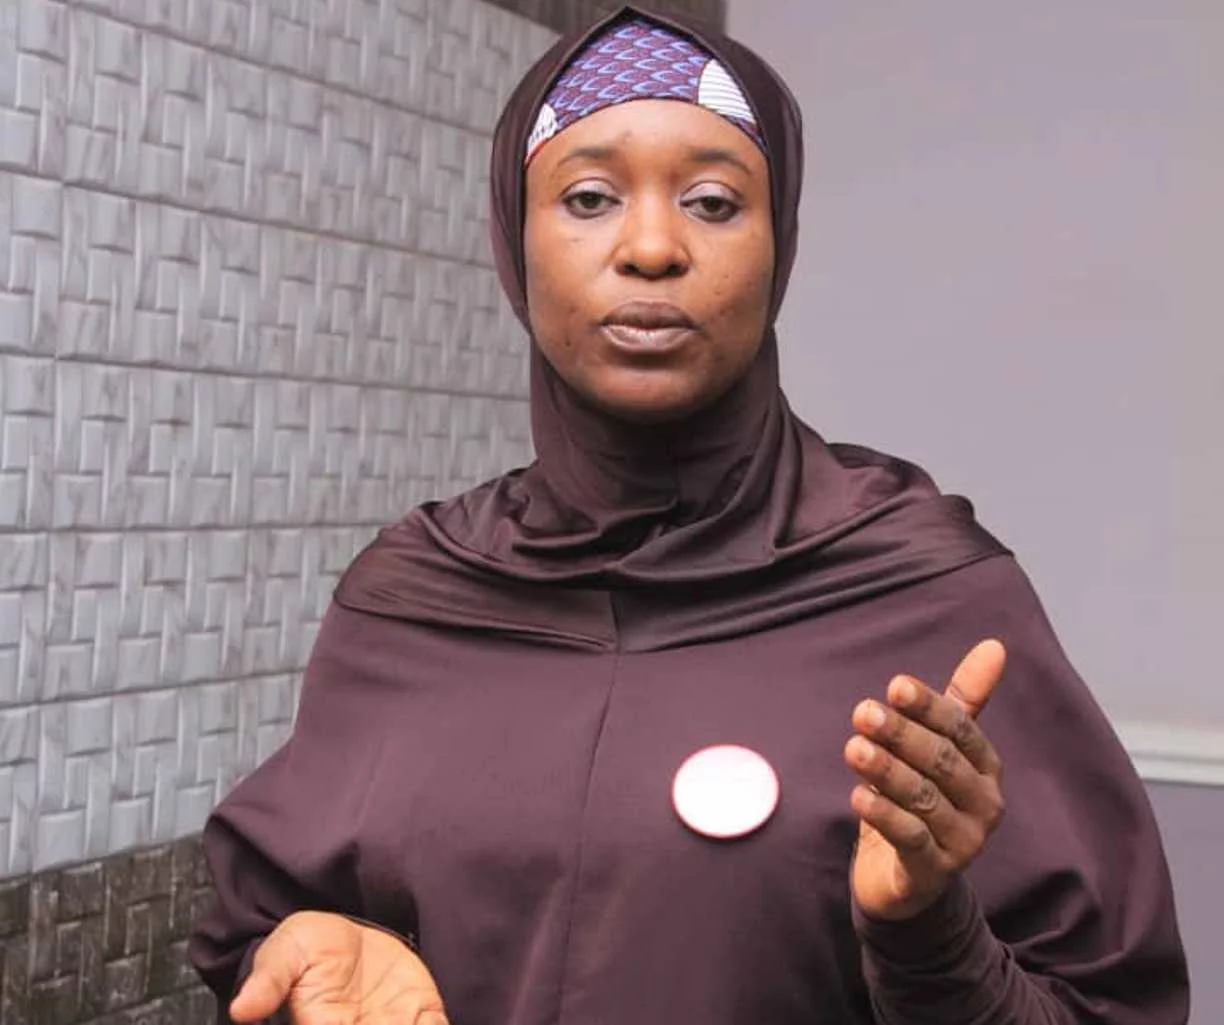 Nigeria We Hail Thee: Why I’ll never stand for new anthem – Aisha Yesufu